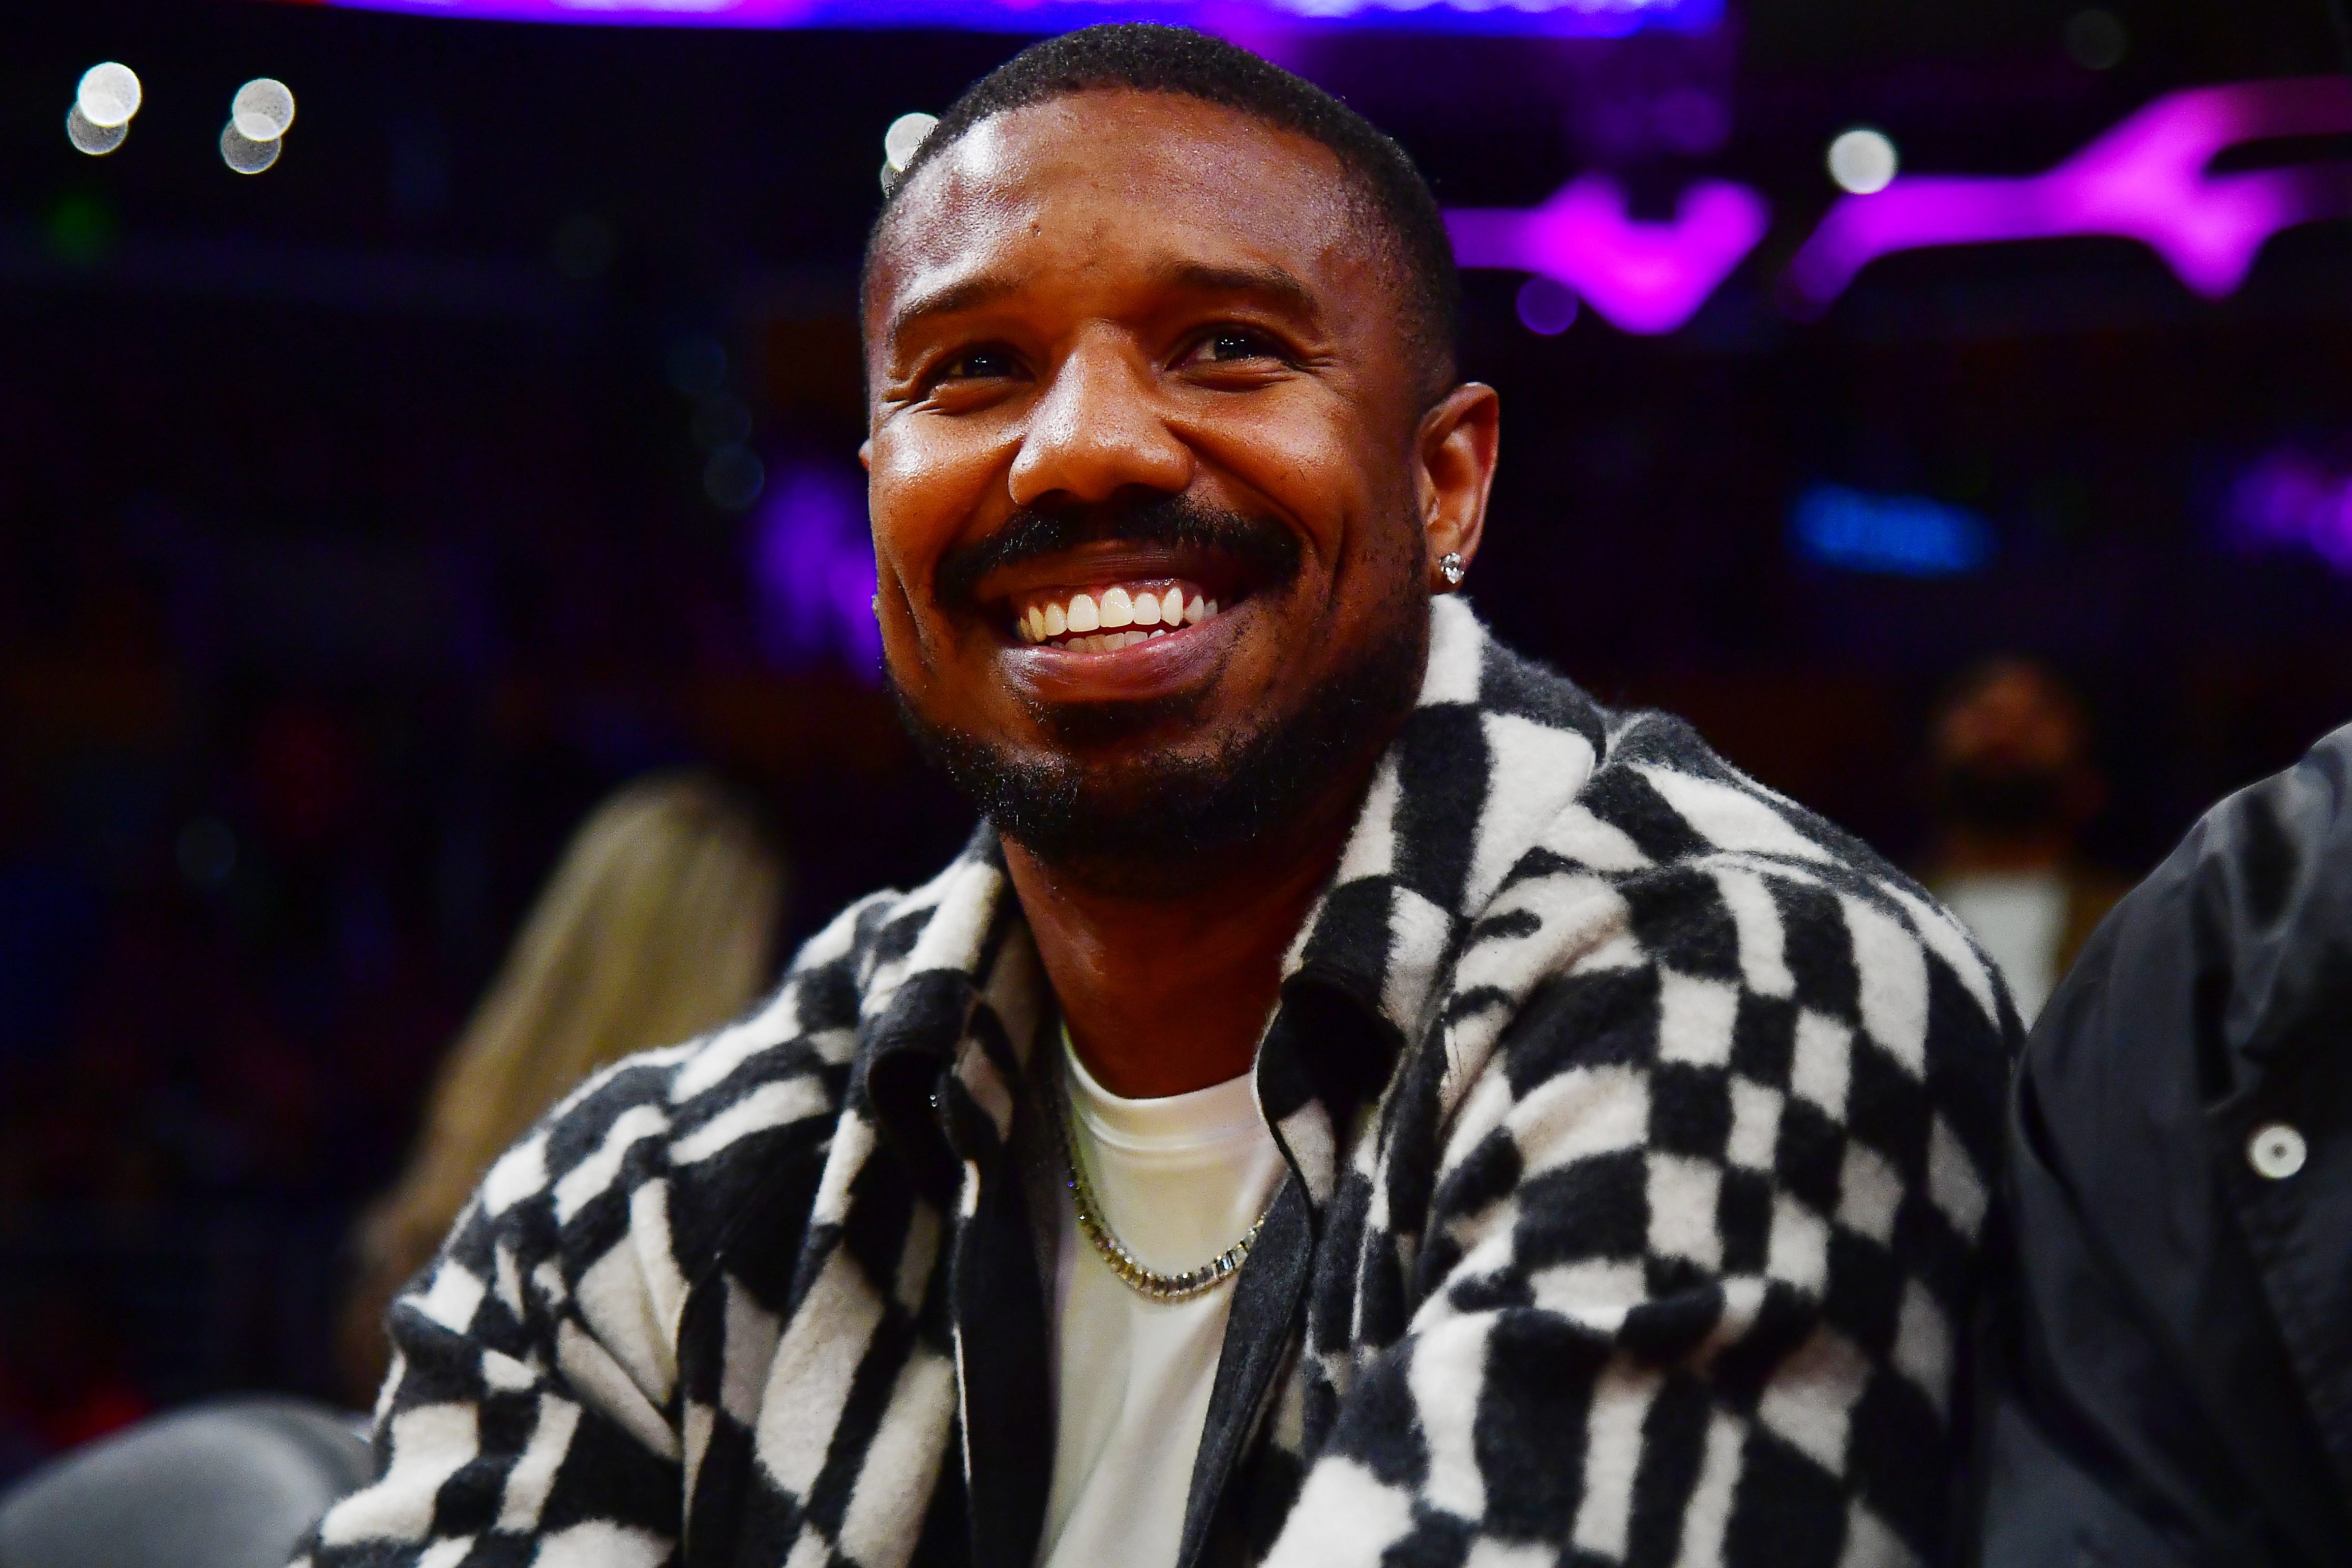 Actor Michael B. Jordan is shown in an April 11, 2023 photo at the Crypto.com Arena.